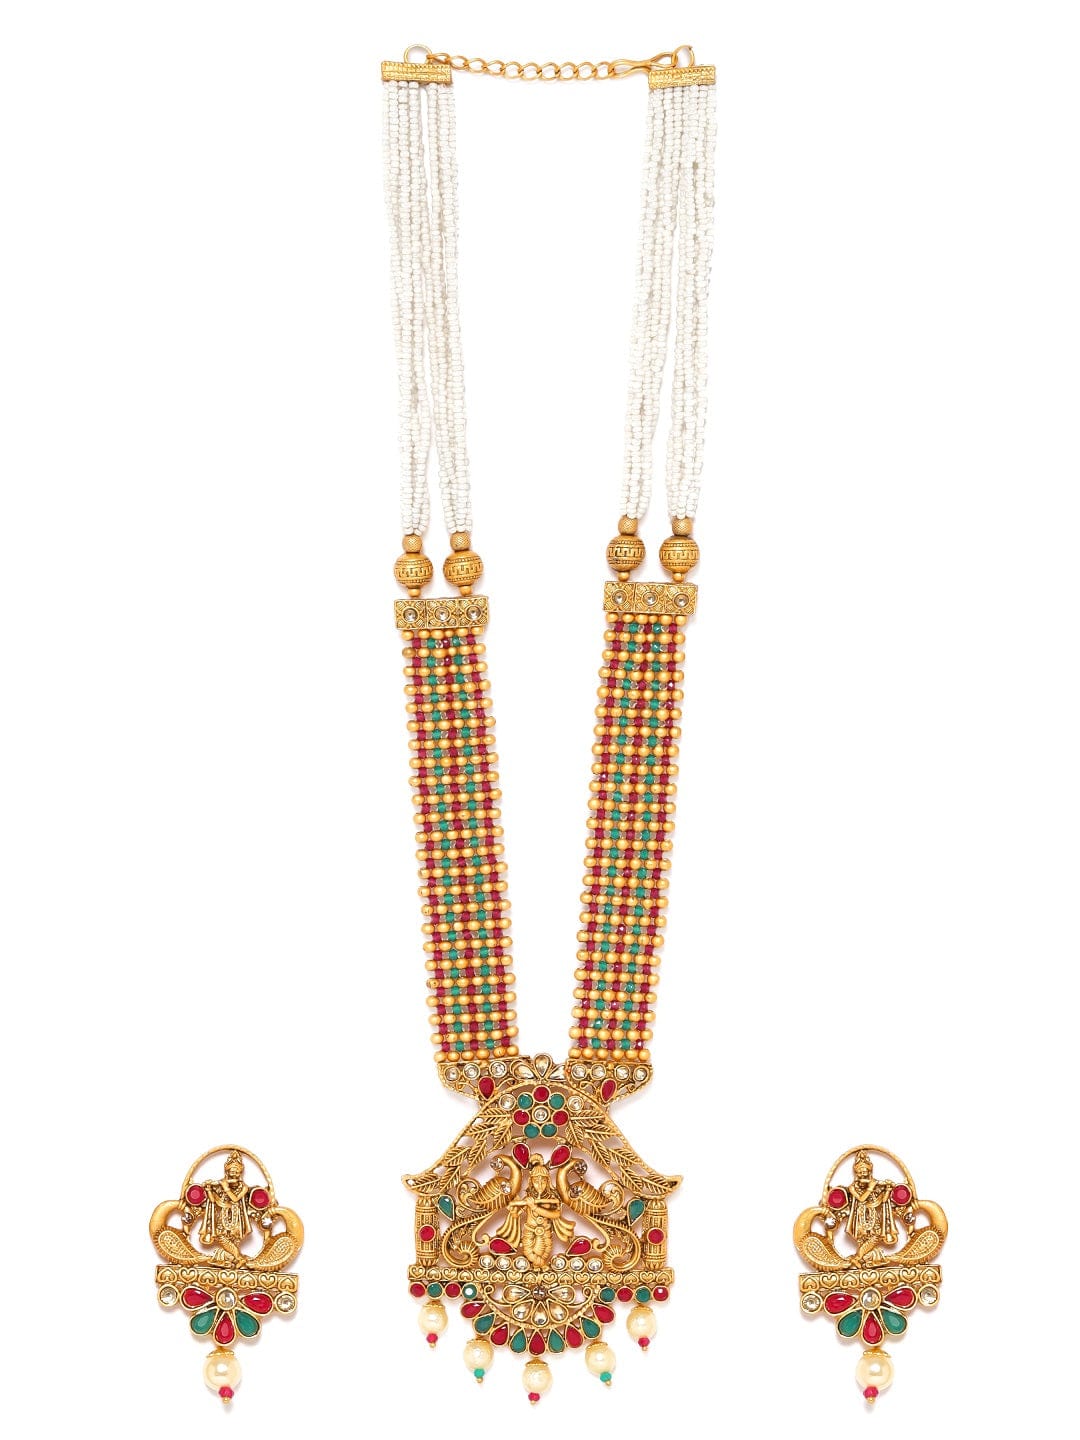 Rubans Gold-Toned Temple Jewellery Pendant Necklace Set with Multi-Colored Beads and Pearl Drops Jewellery Sets